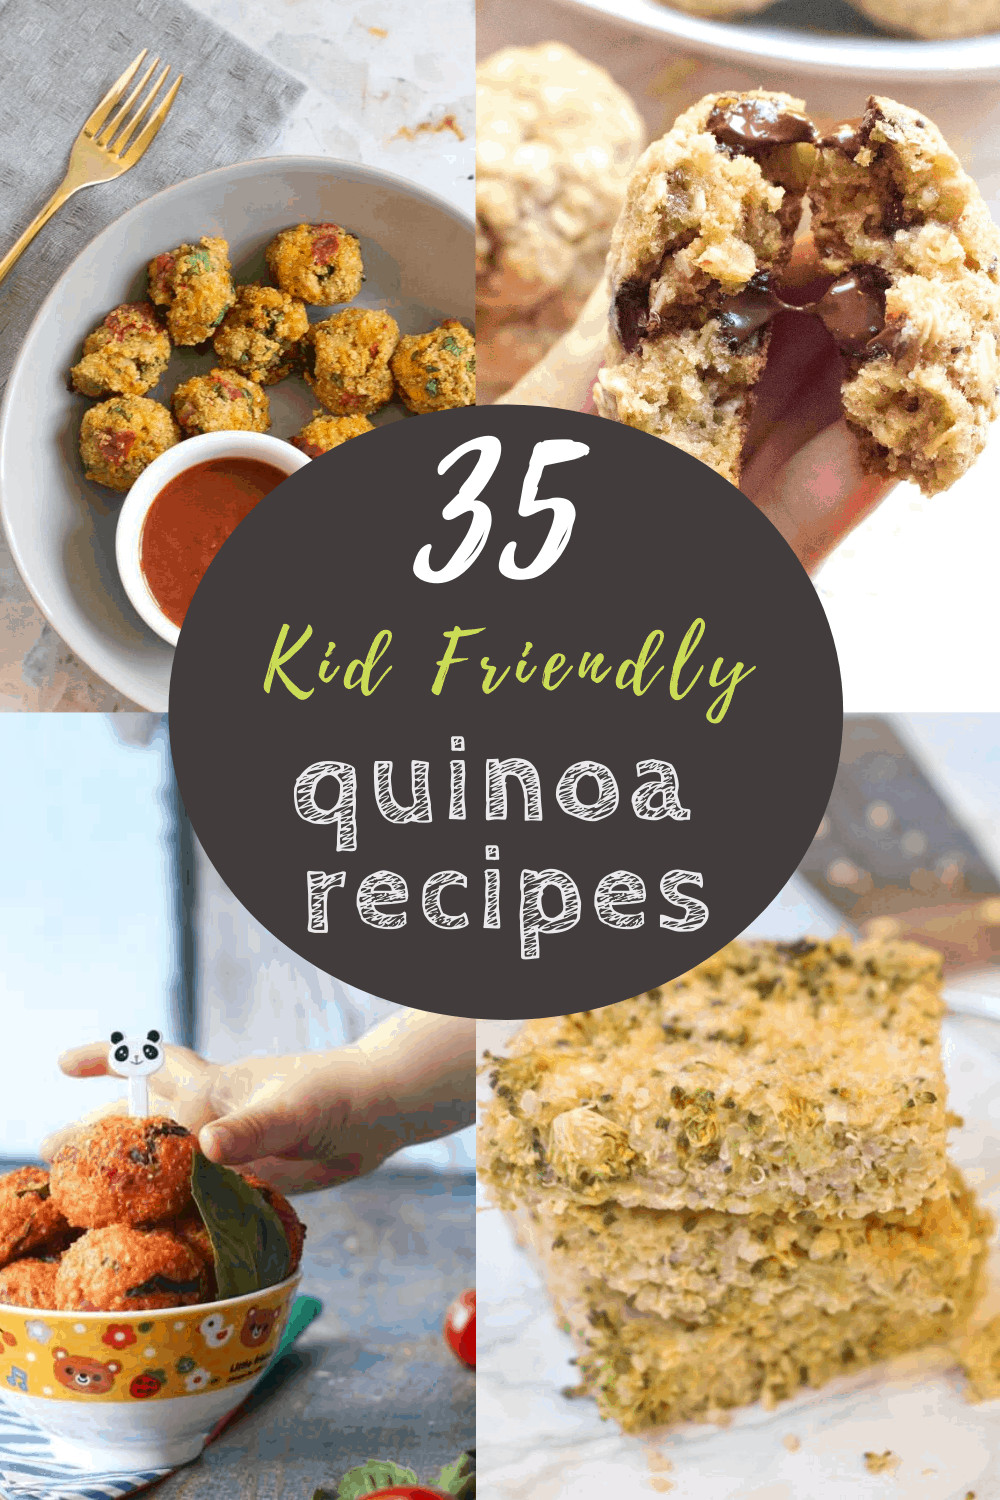 Quinoa Recipes Kid Friendly
 Are you looking for some easy quinoa recipes for kids